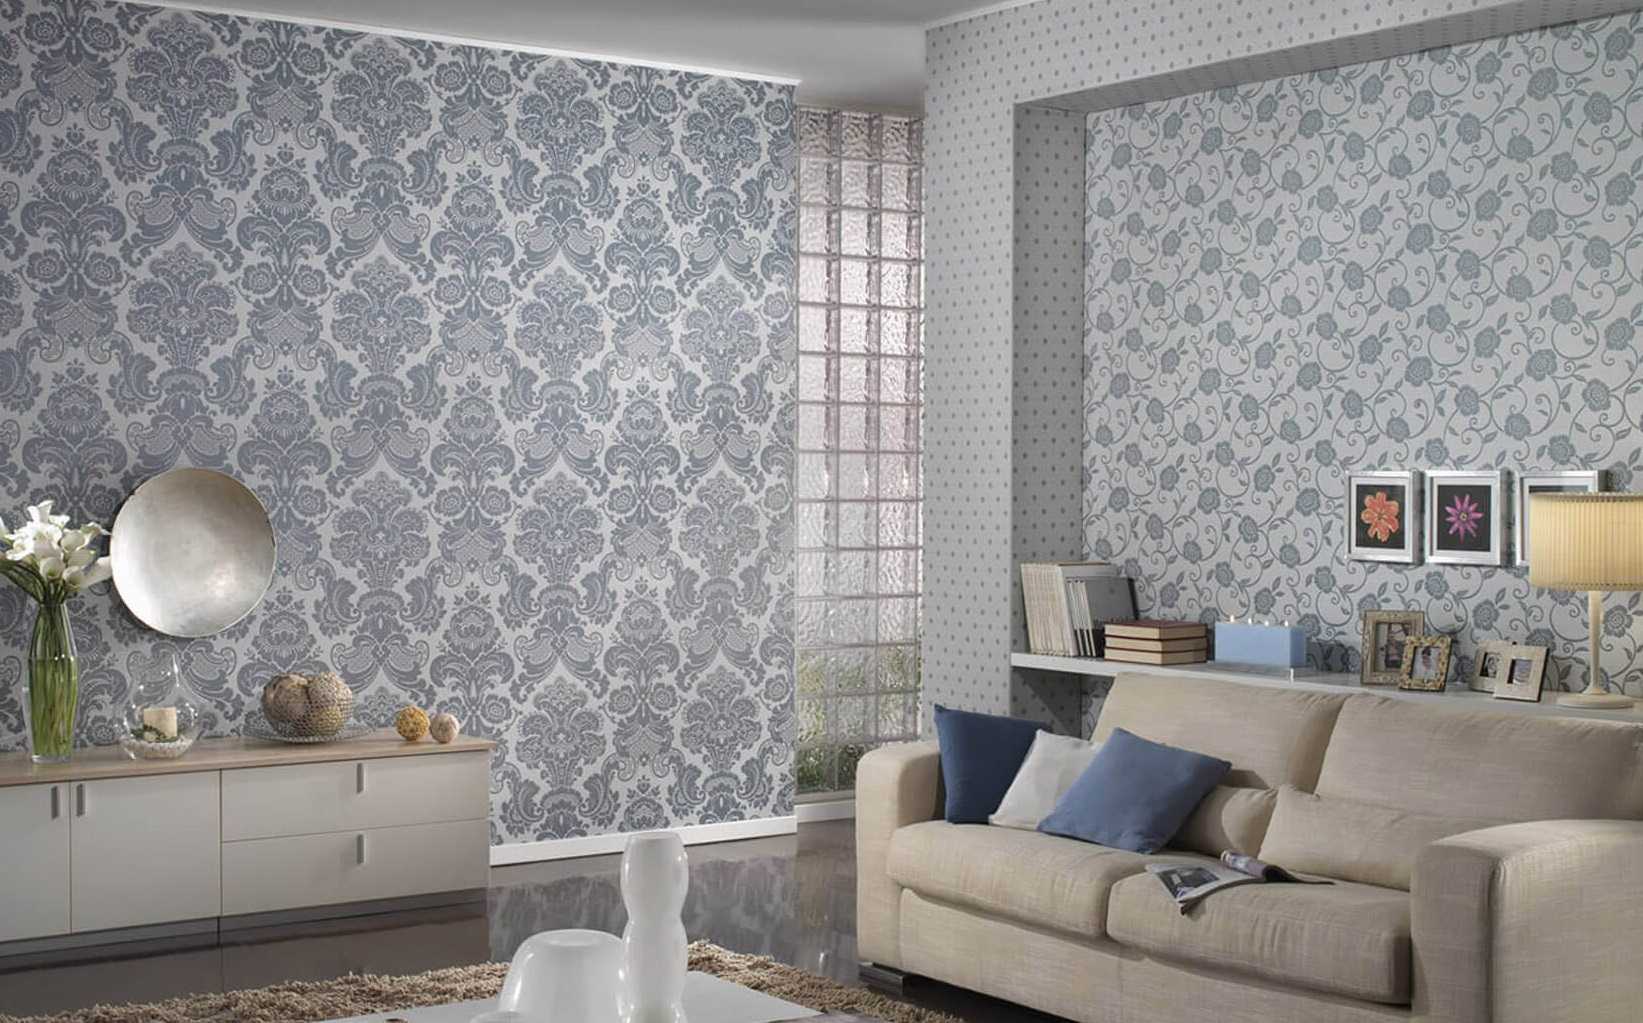 combination of original wallpaper in the decor of the living room